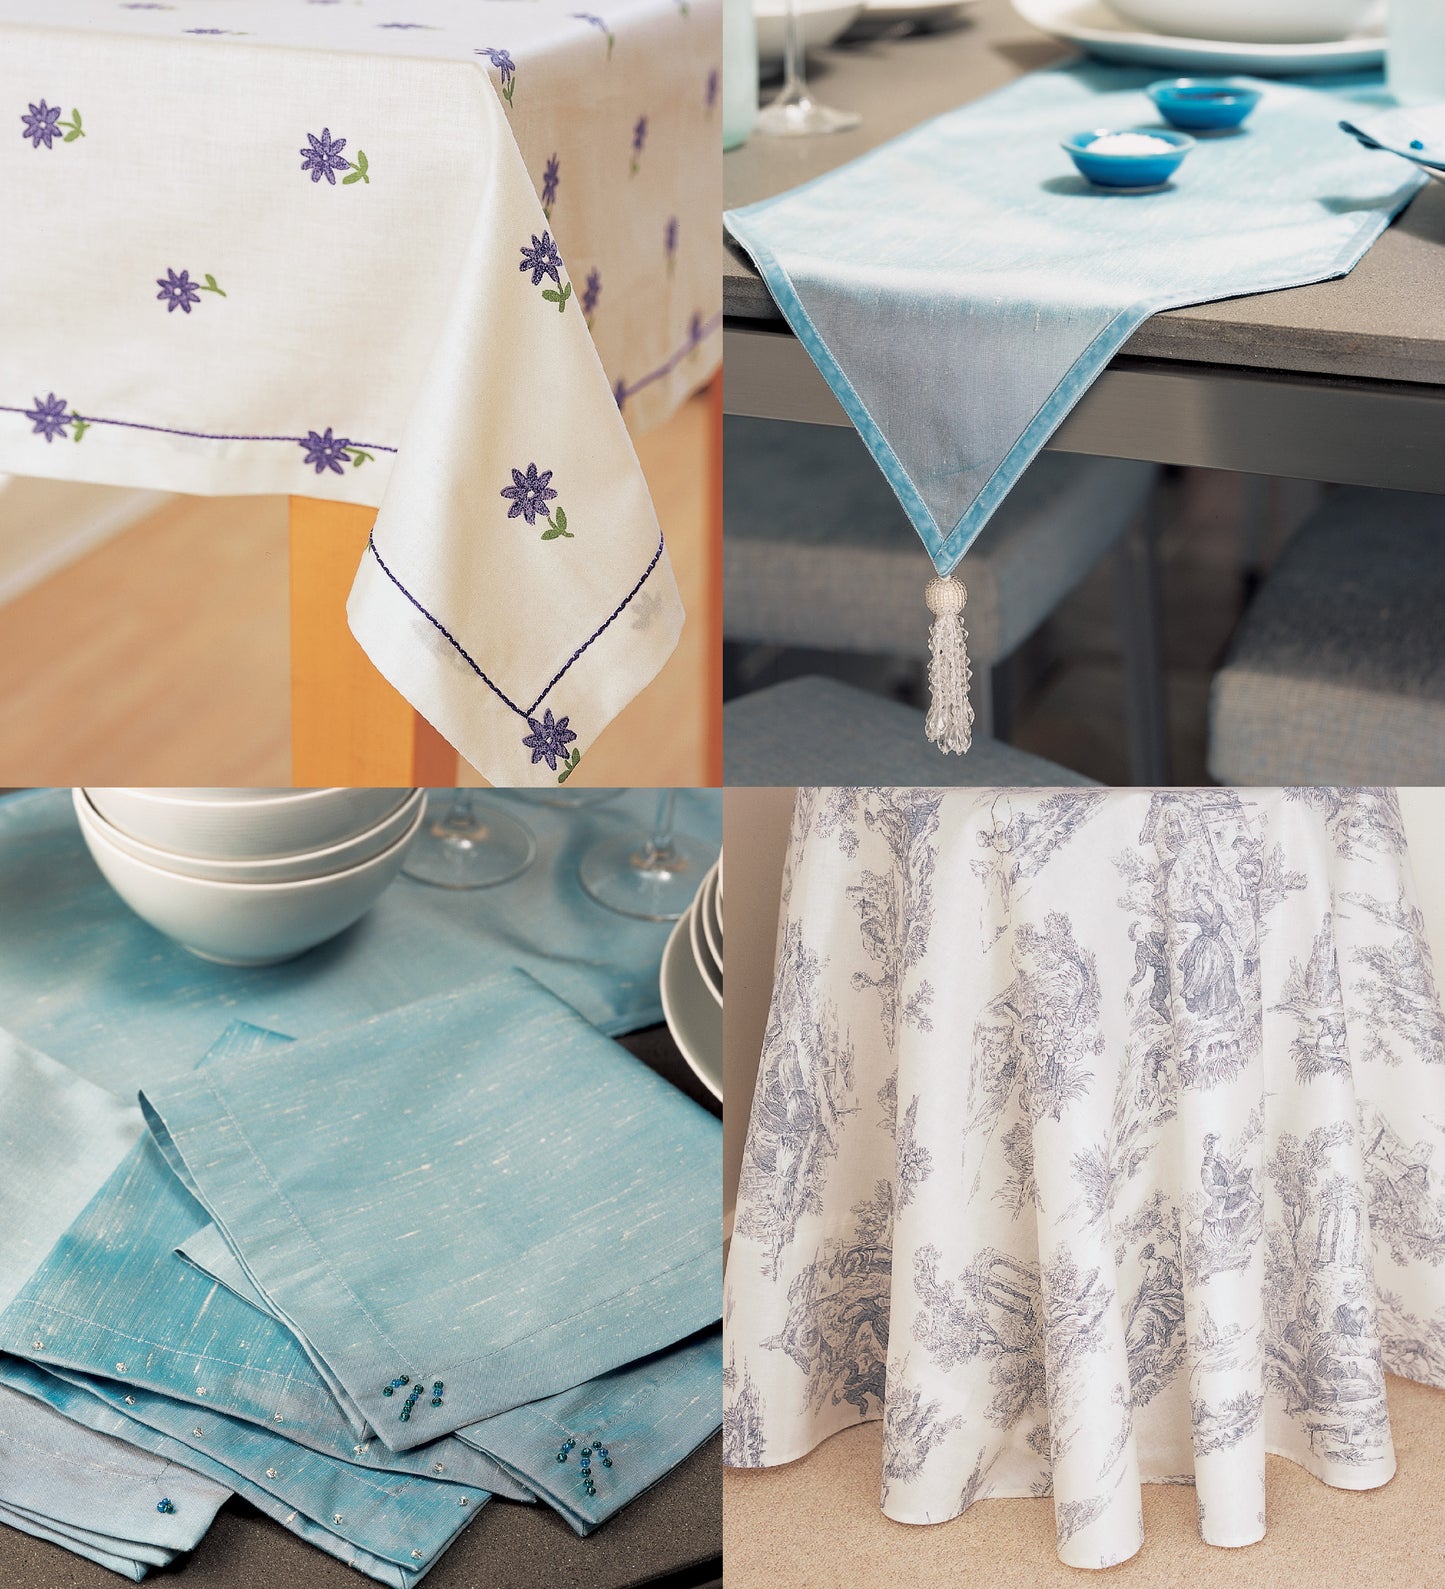 Weekend Projects: Soft Furnishings